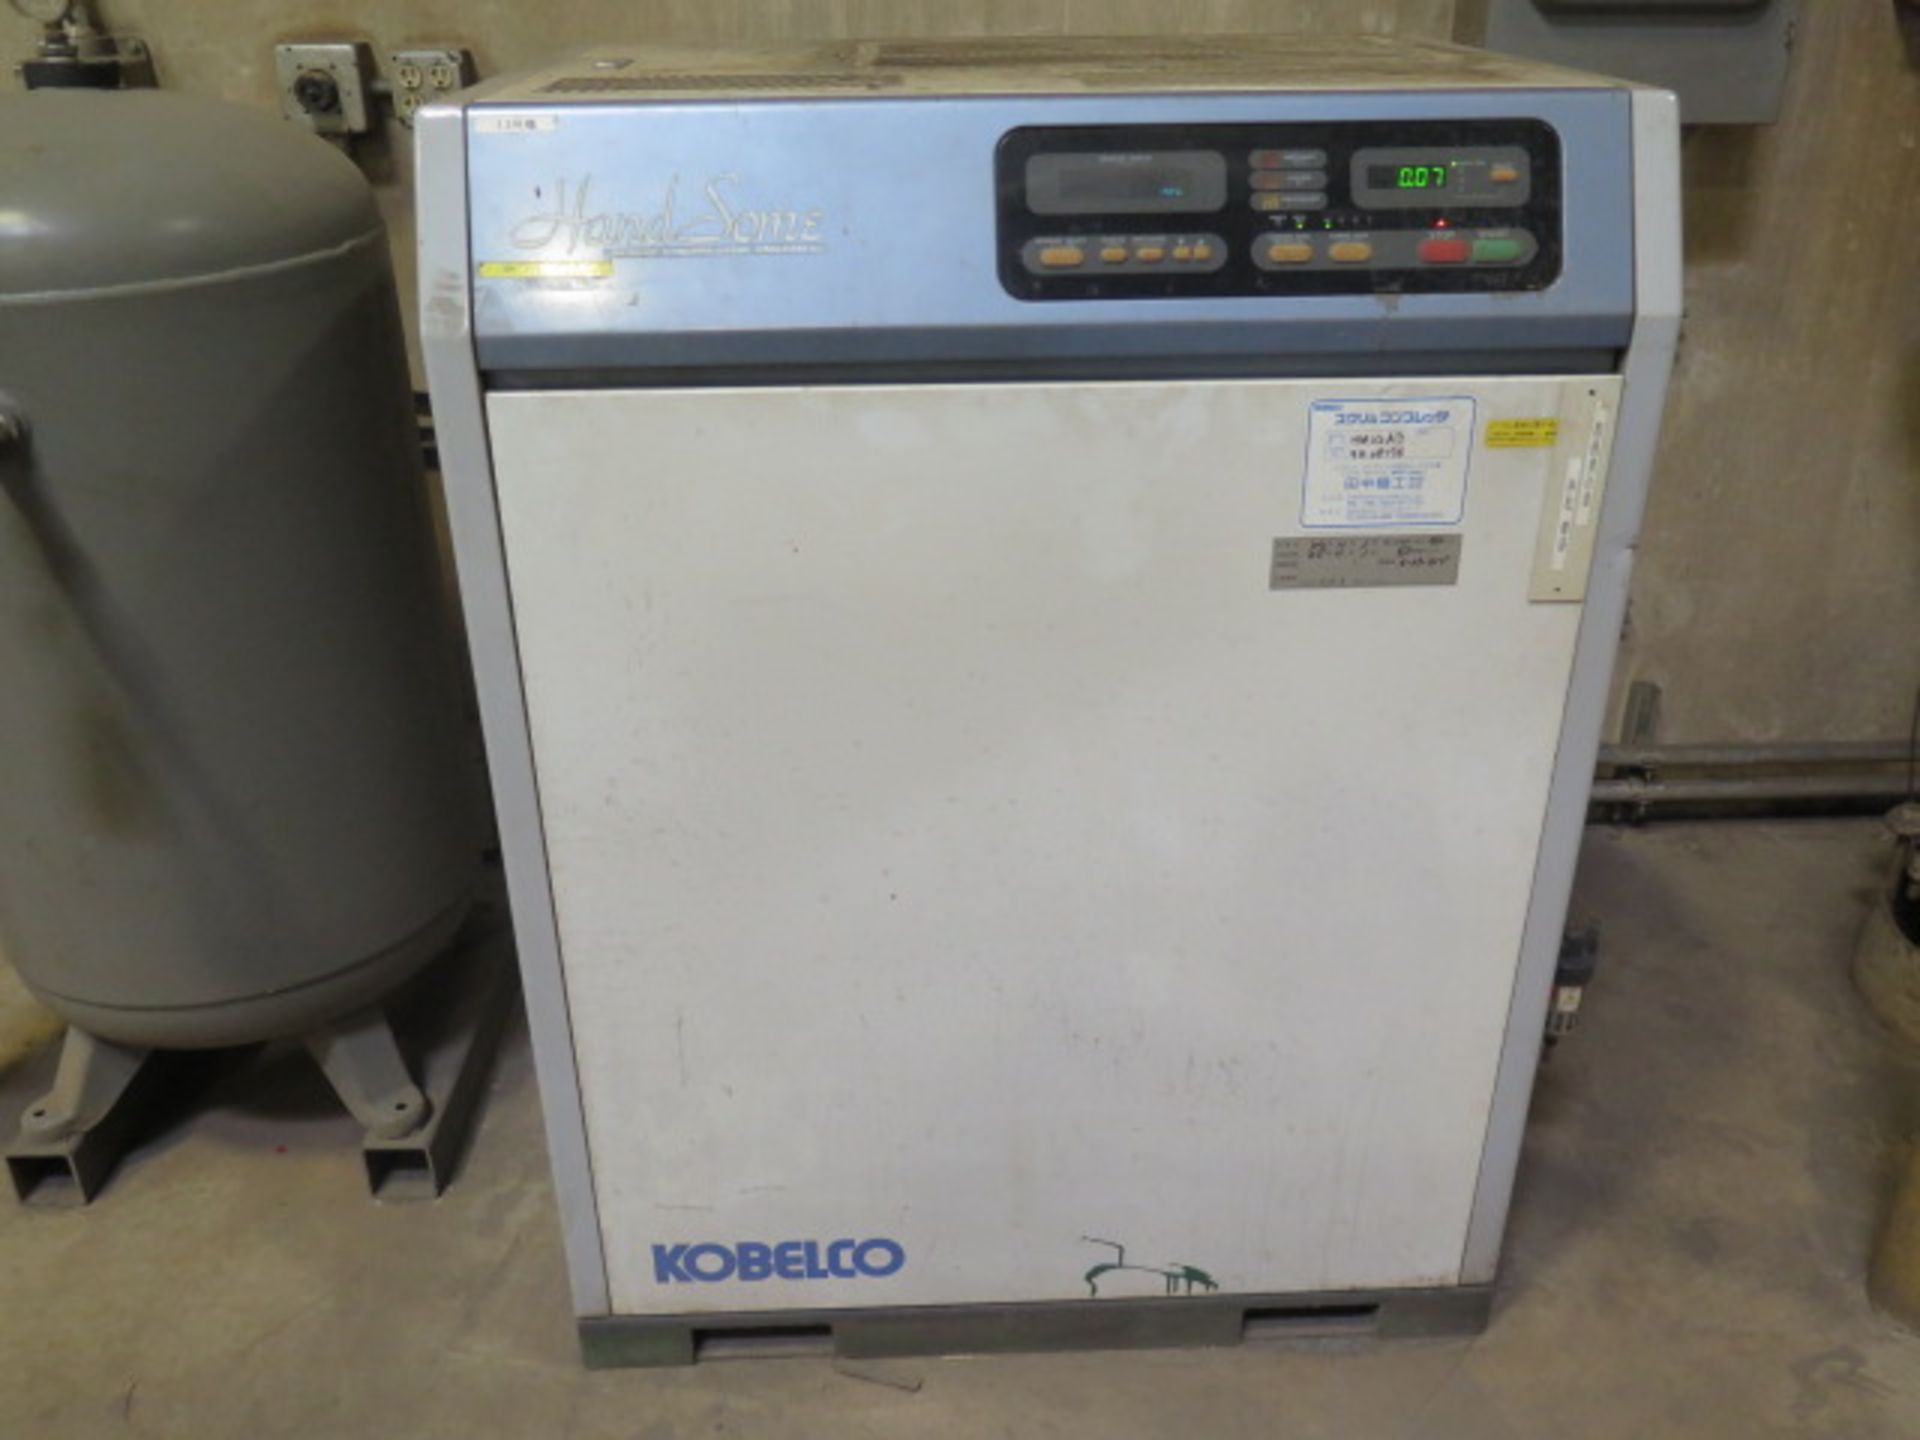 Kobelco "Hand Some" HM22AD-5i Rotary Air Compressor w/ Digital Controls, 80 Gallon Tank, SOLD AS IS - Image 2 of 8